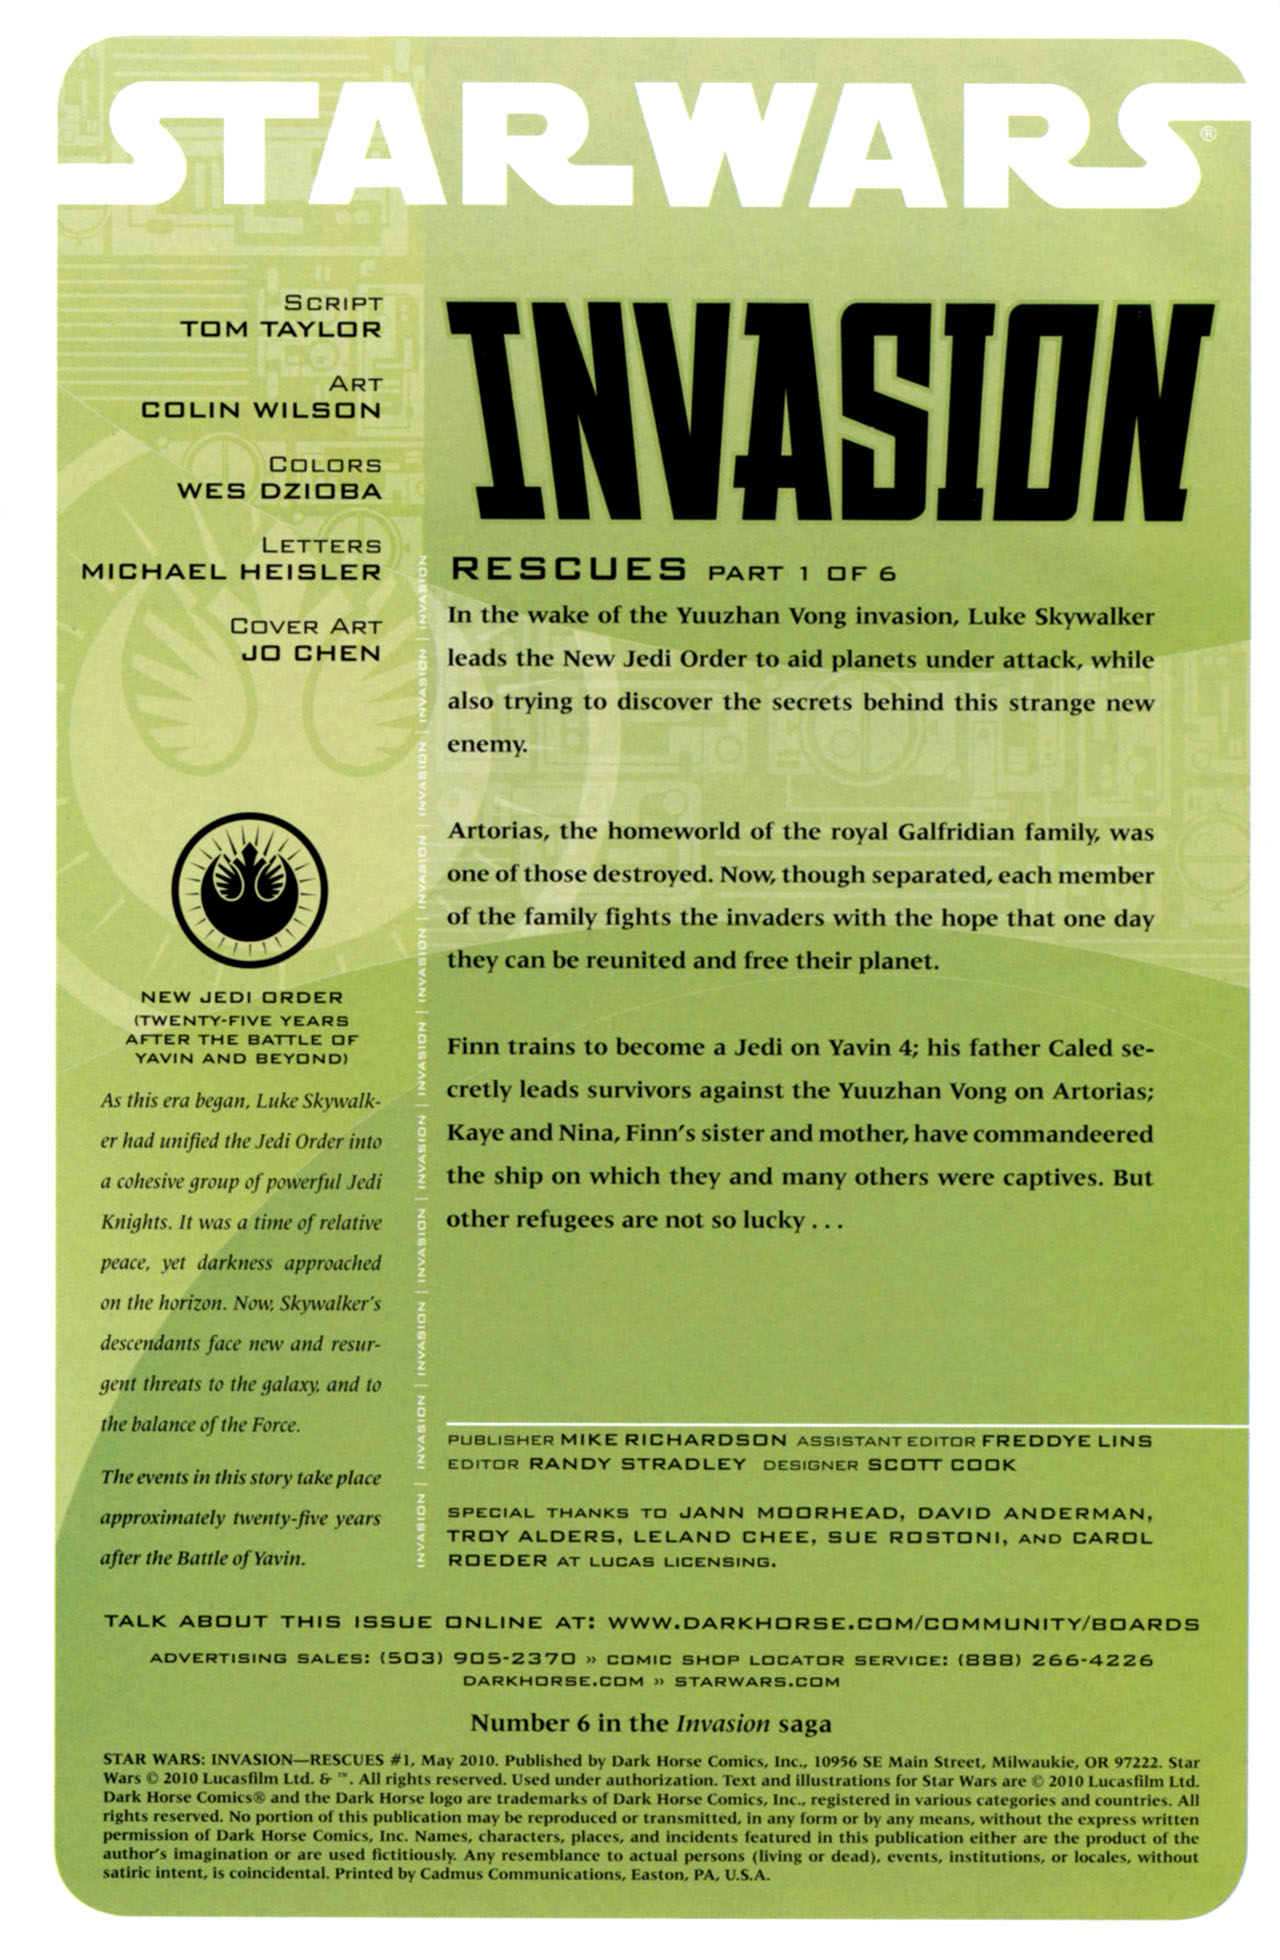 Read online Star Wars: Invasion - Rescues comic -  Issue #1 - 2